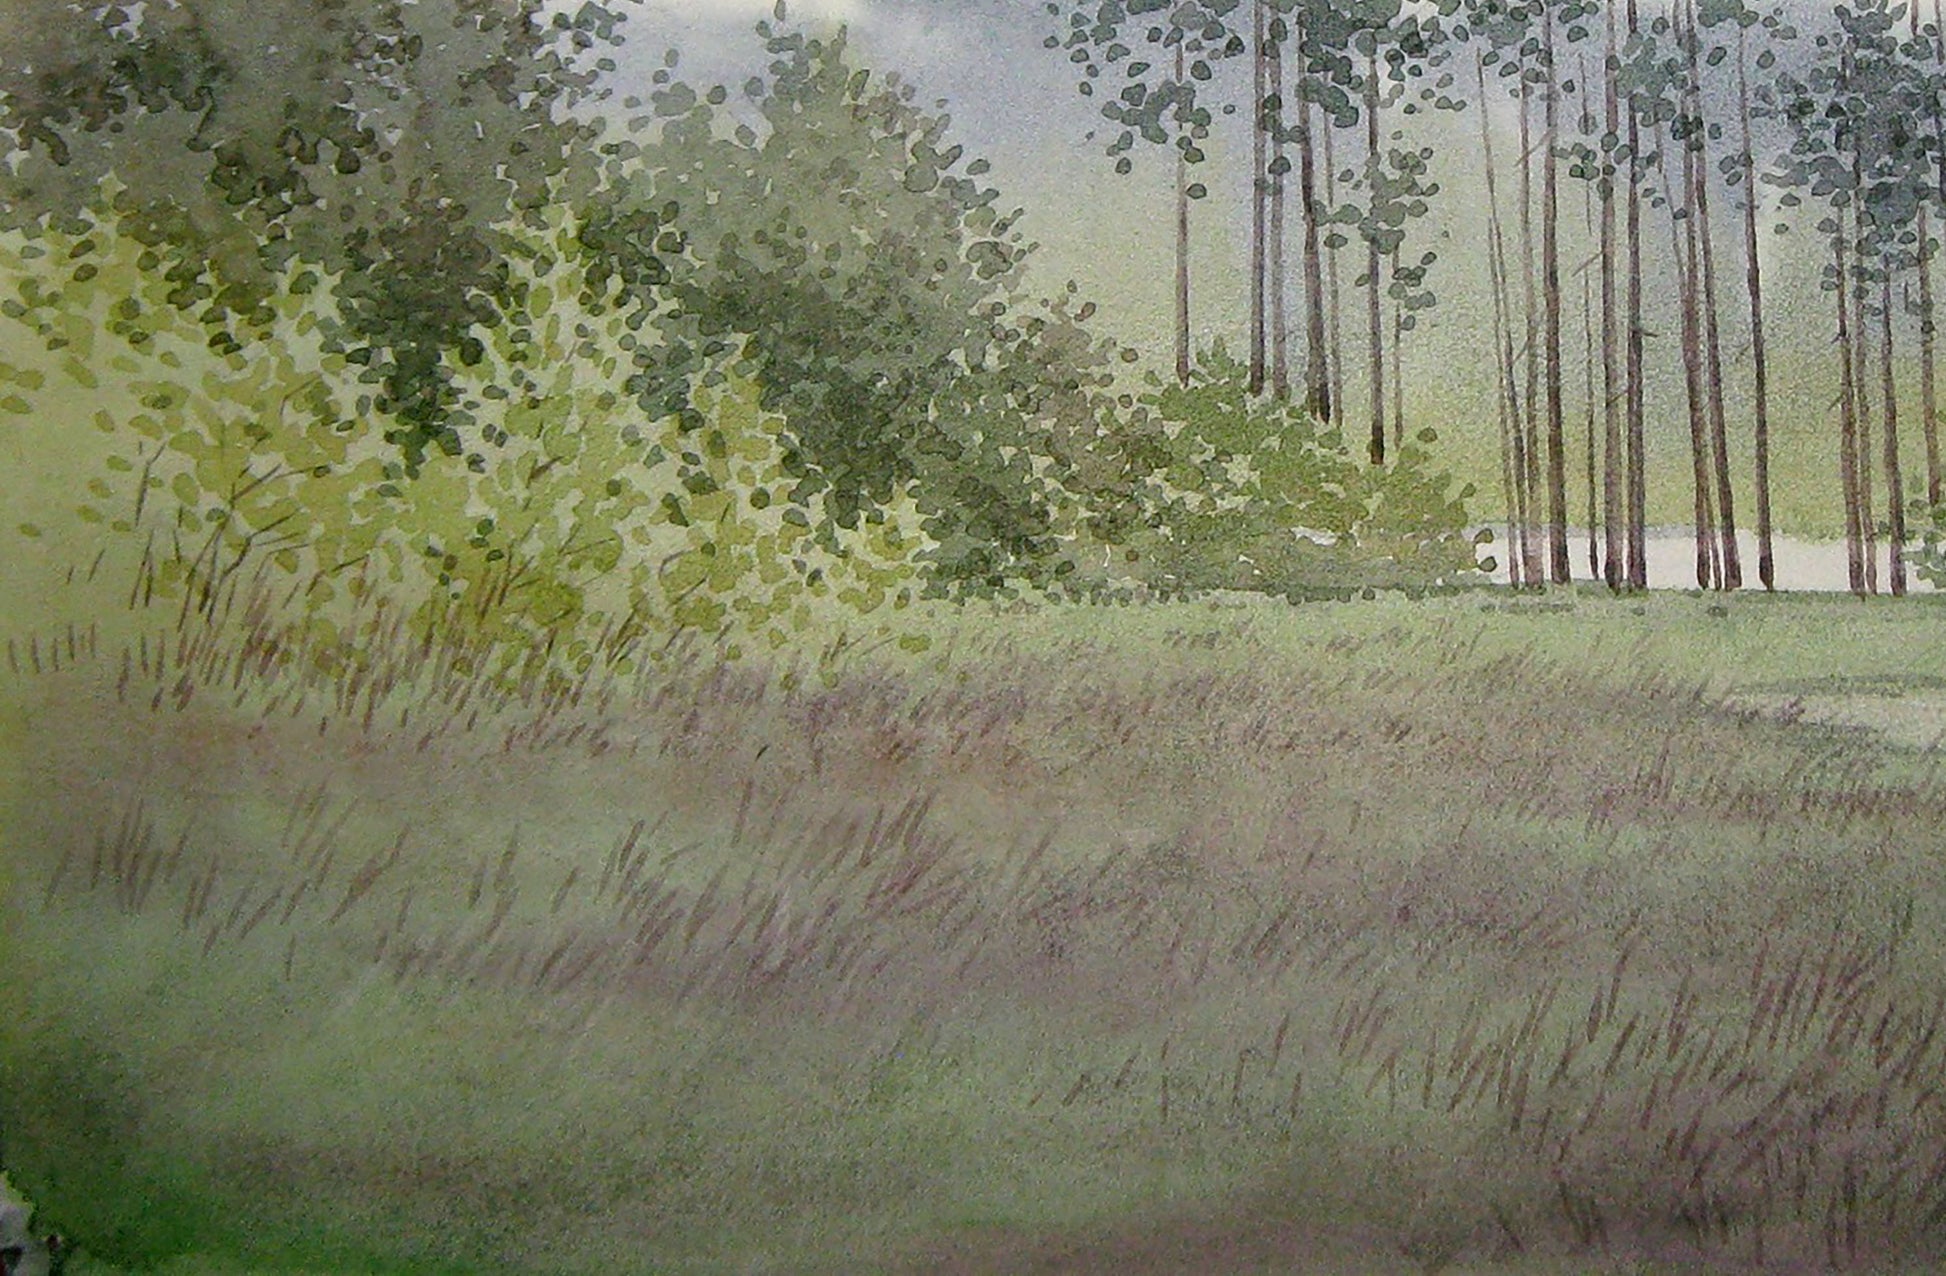 Valery Savenets portrays a pause amidst the trees in his watercolor painting titled "Forest Halt"